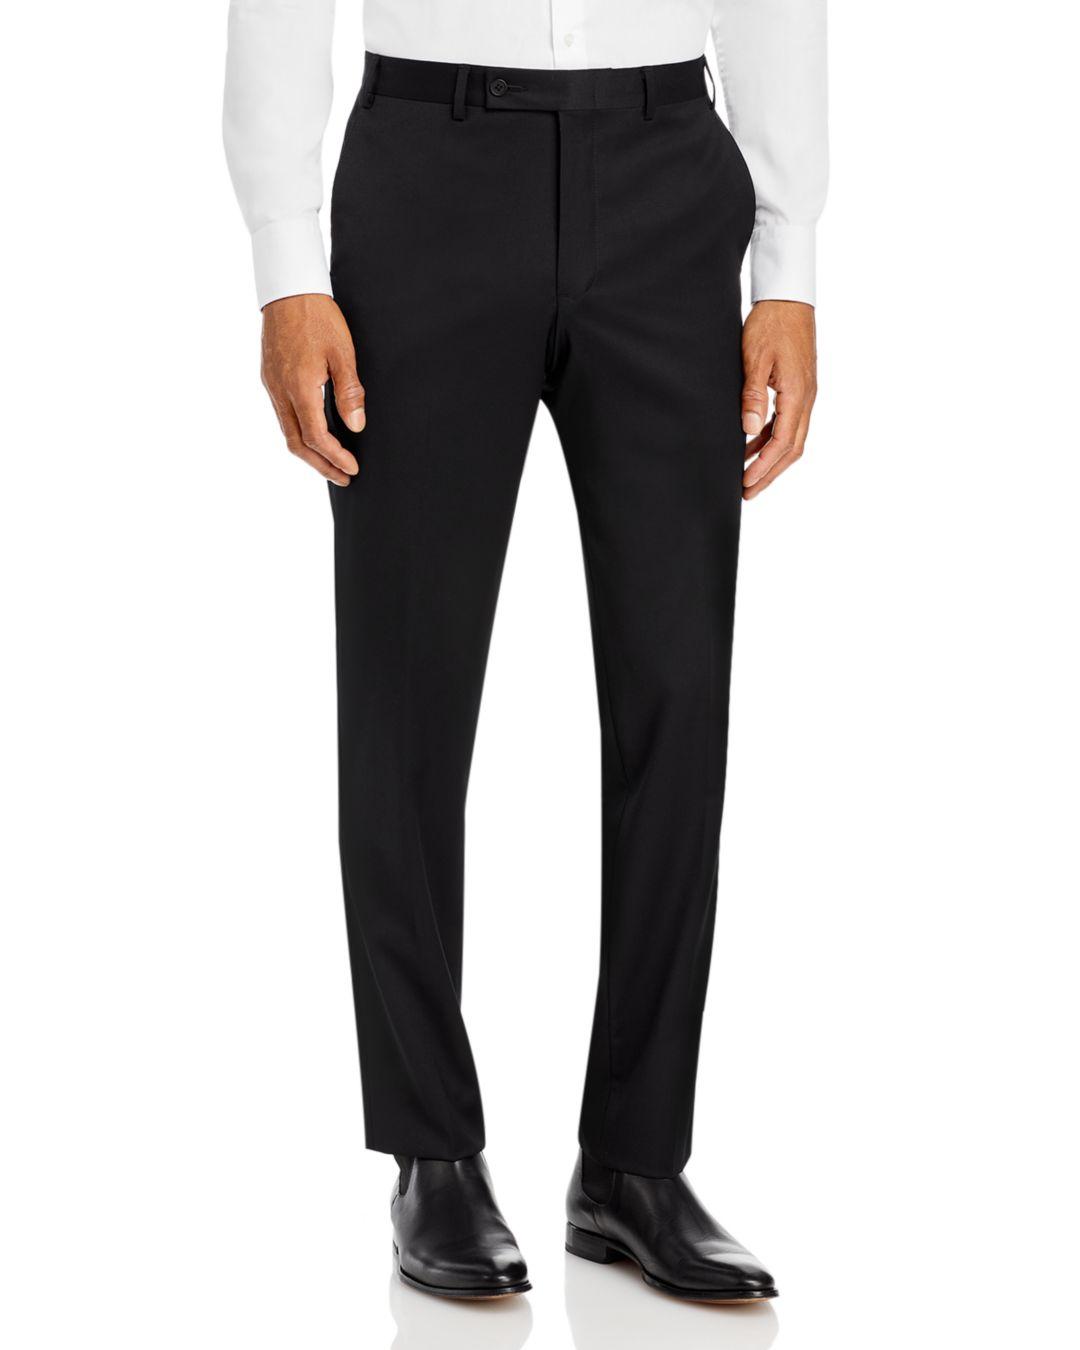 100% Exclusive Bloomingdales Men Clothing Pants Chinos Tailored Fit Chinos 